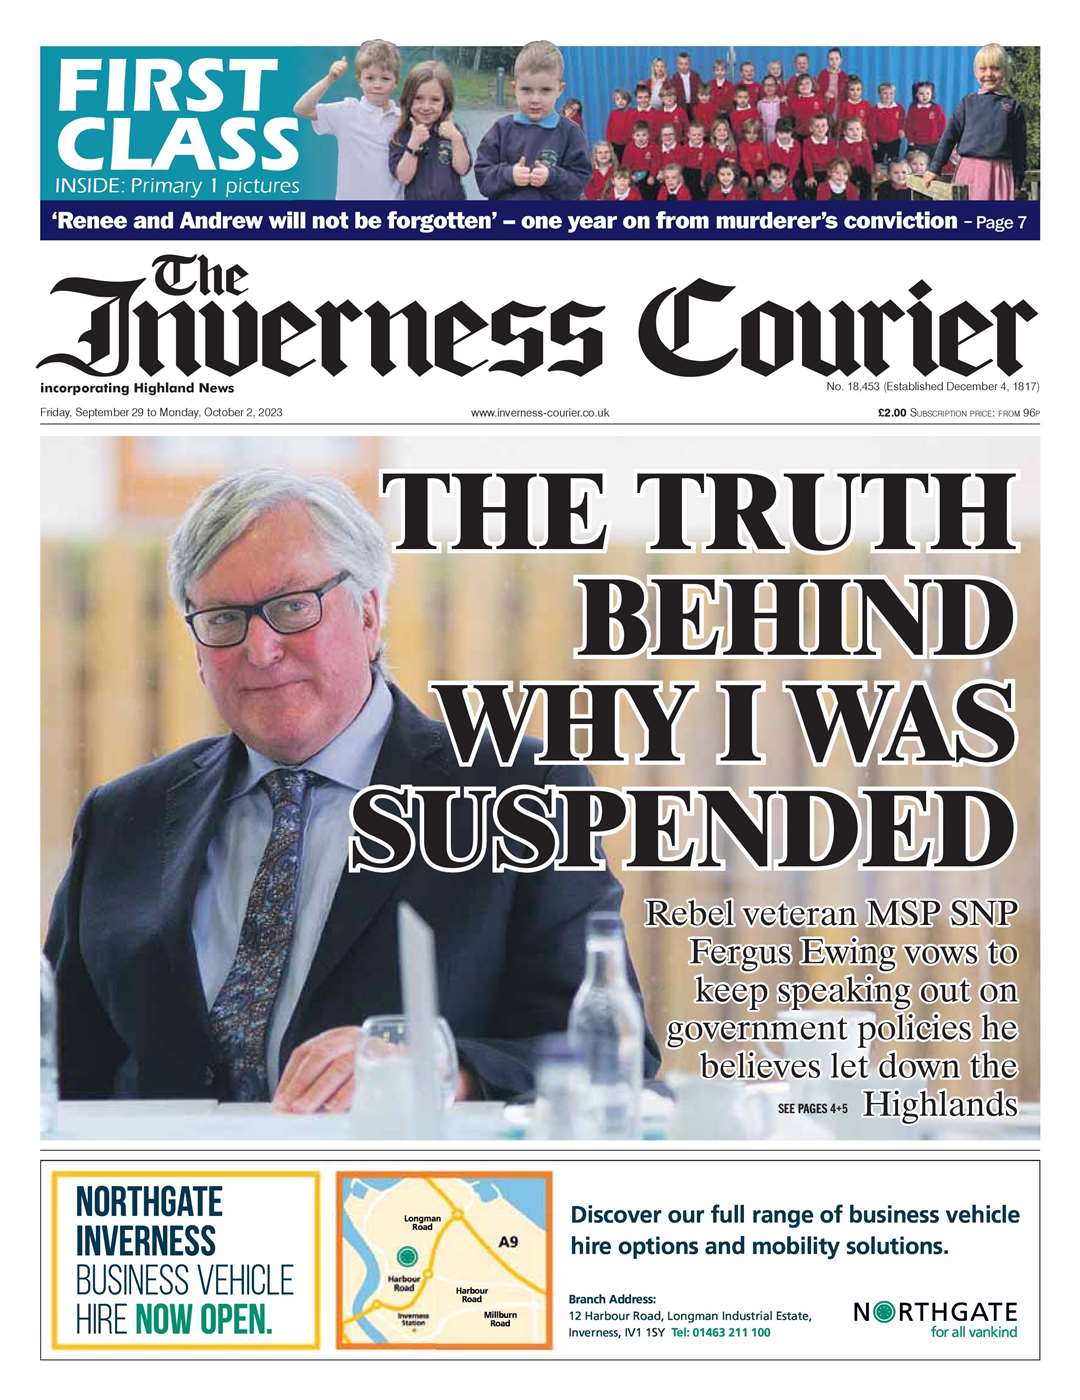 The Inverness Courier, September 29, front page.